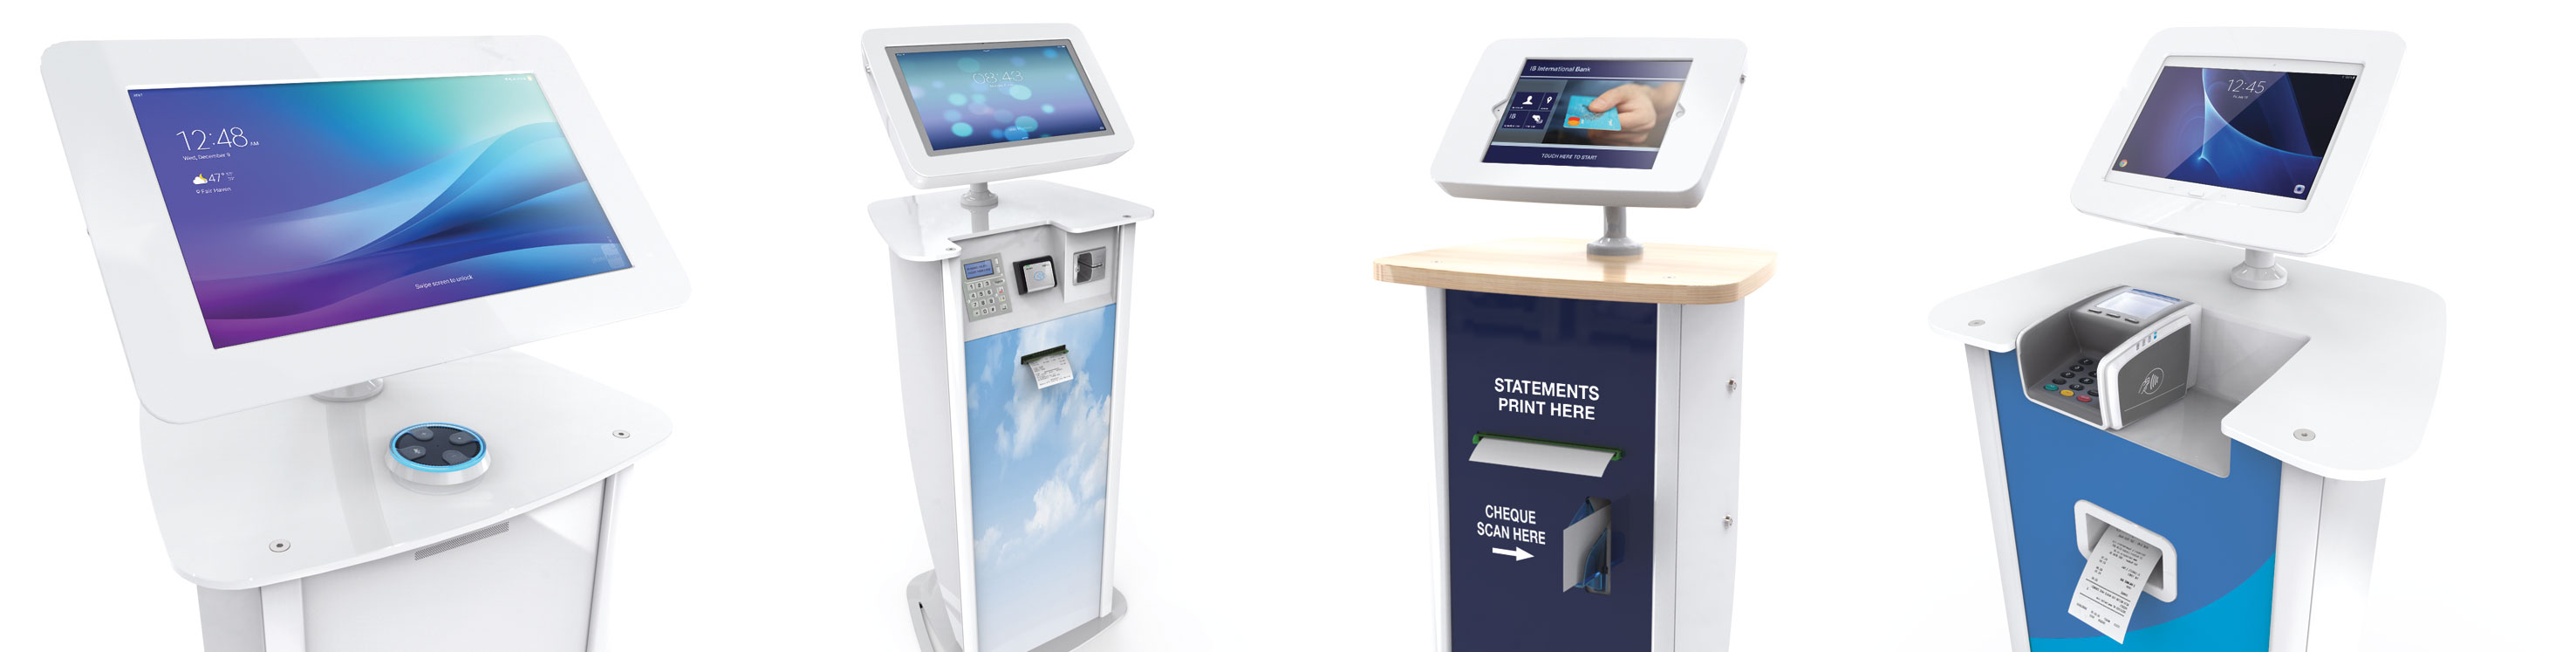 The Important Features for Every Kiosk System